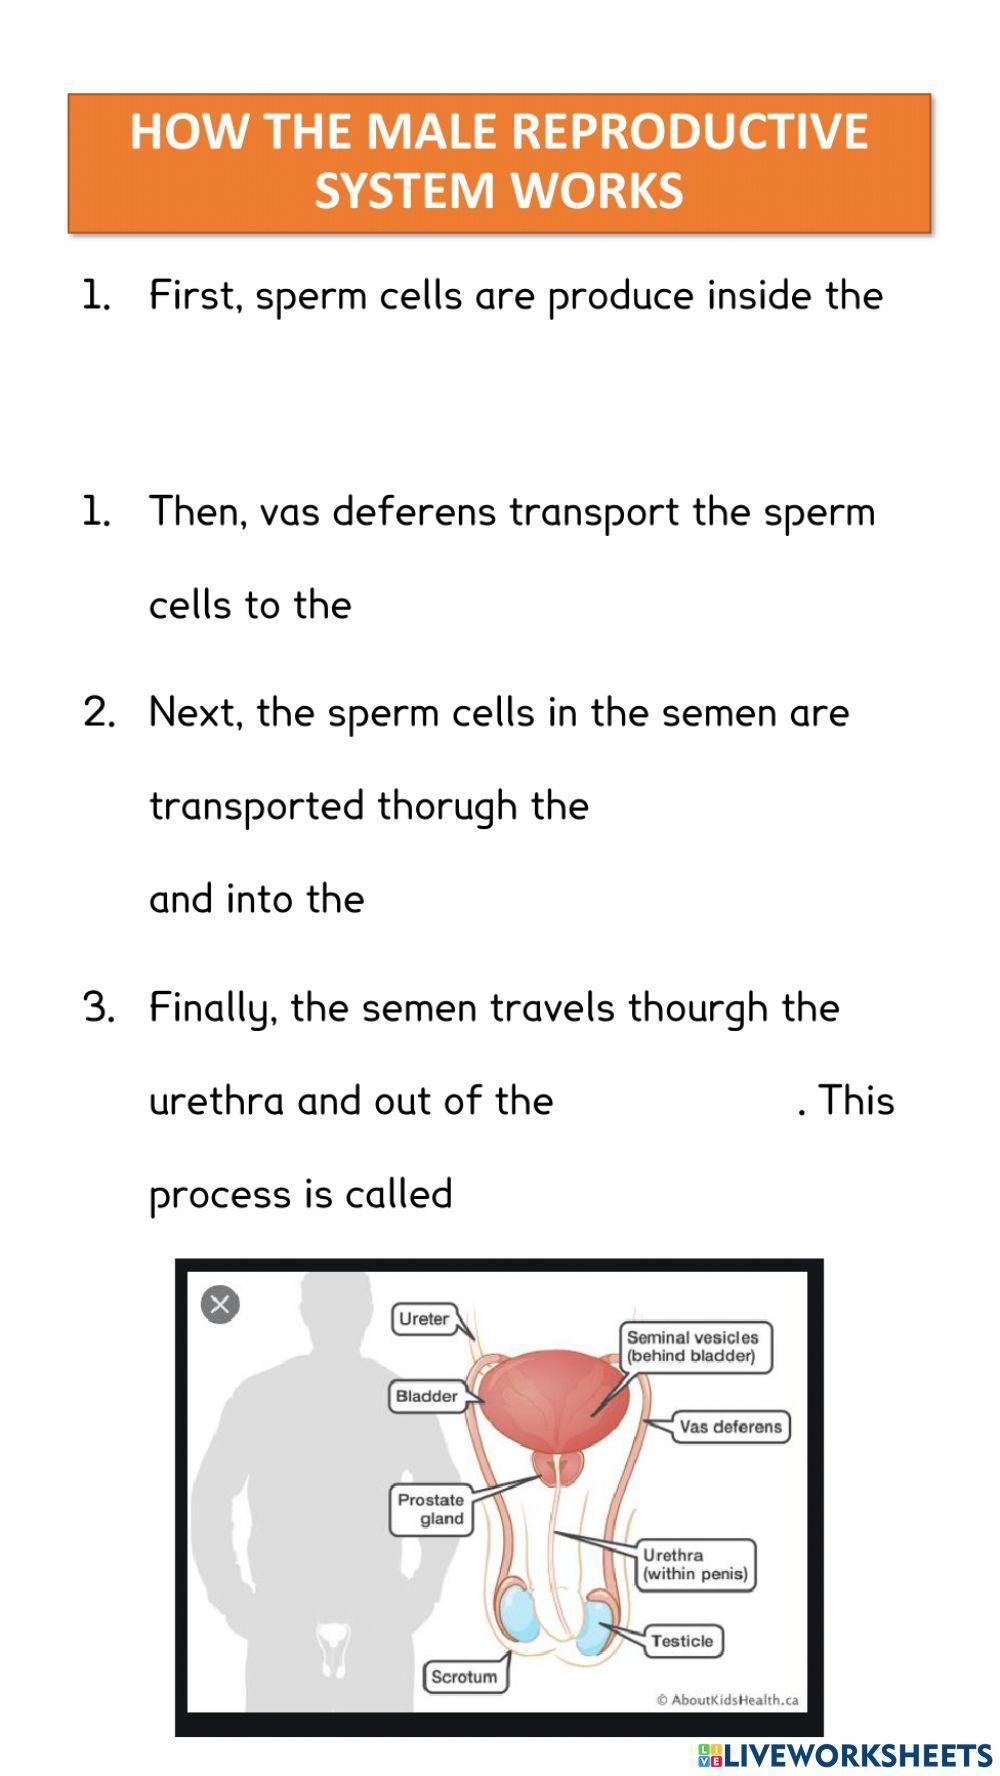 How the male reproductive system works